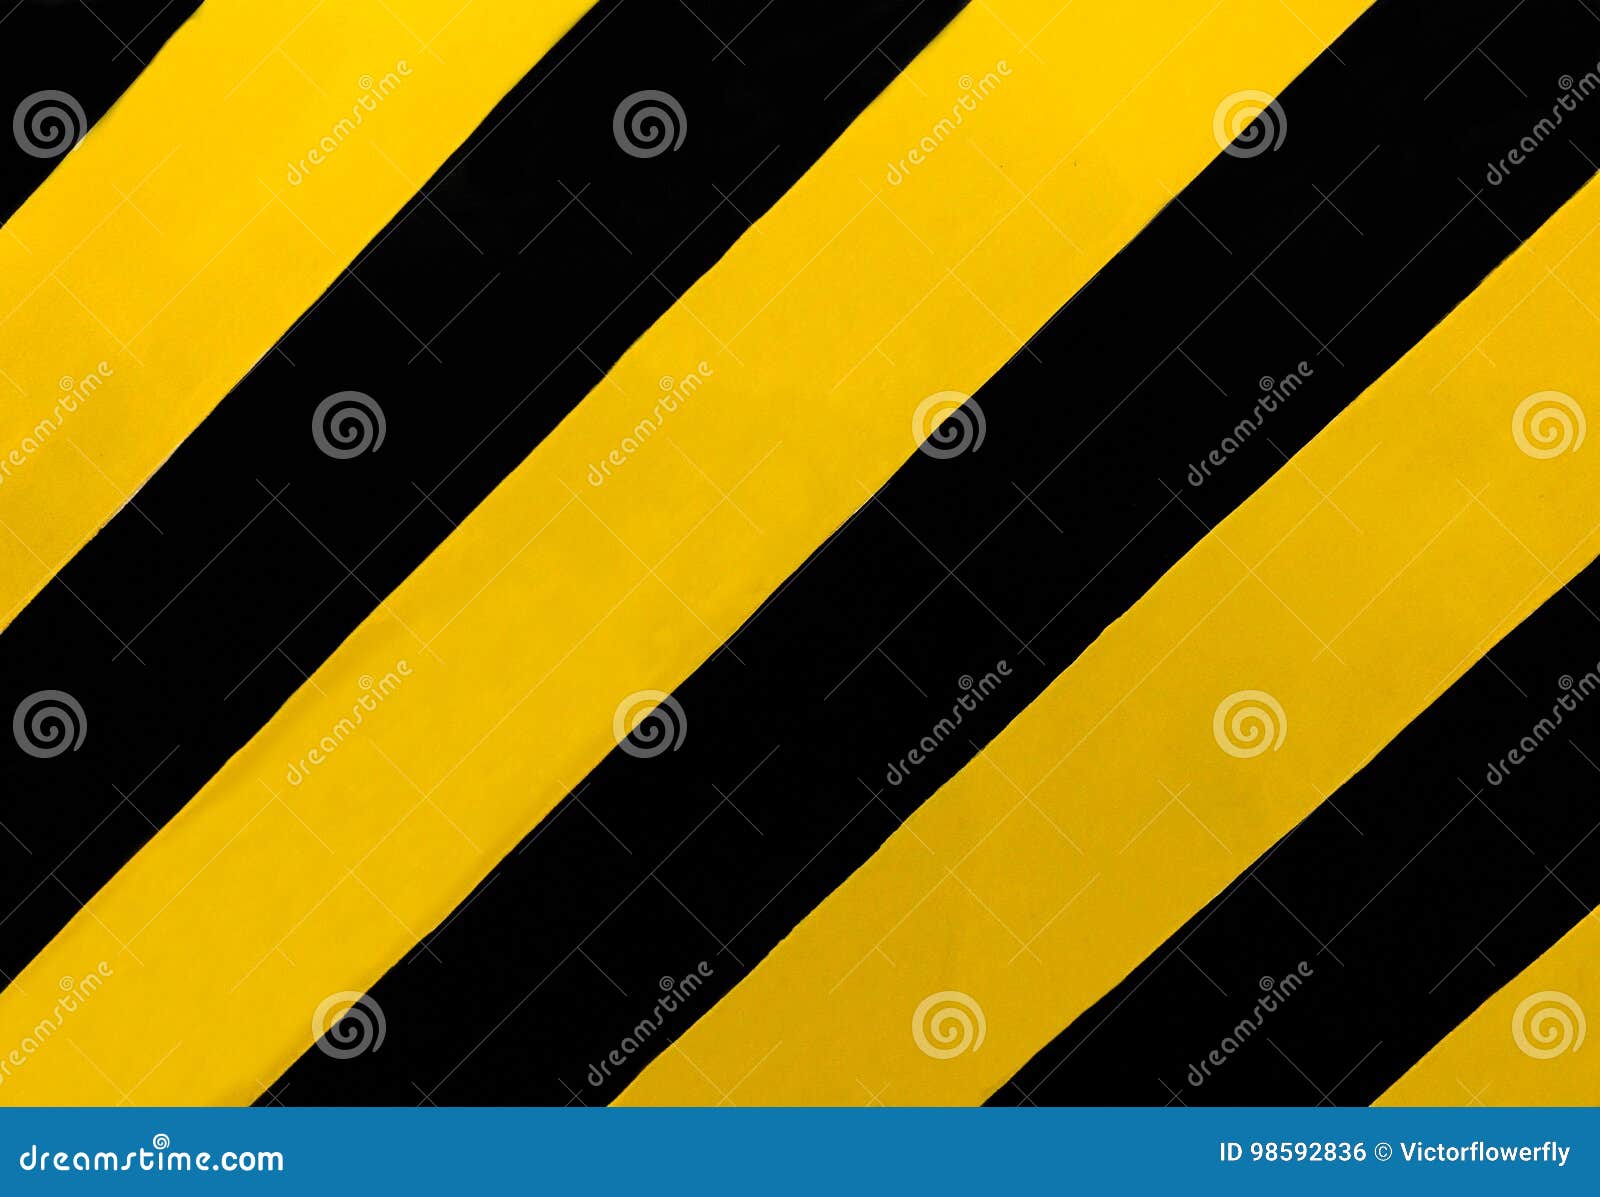 Traffic Sign A Rectangular Sign With Diagonal Yellow And Black Stripes